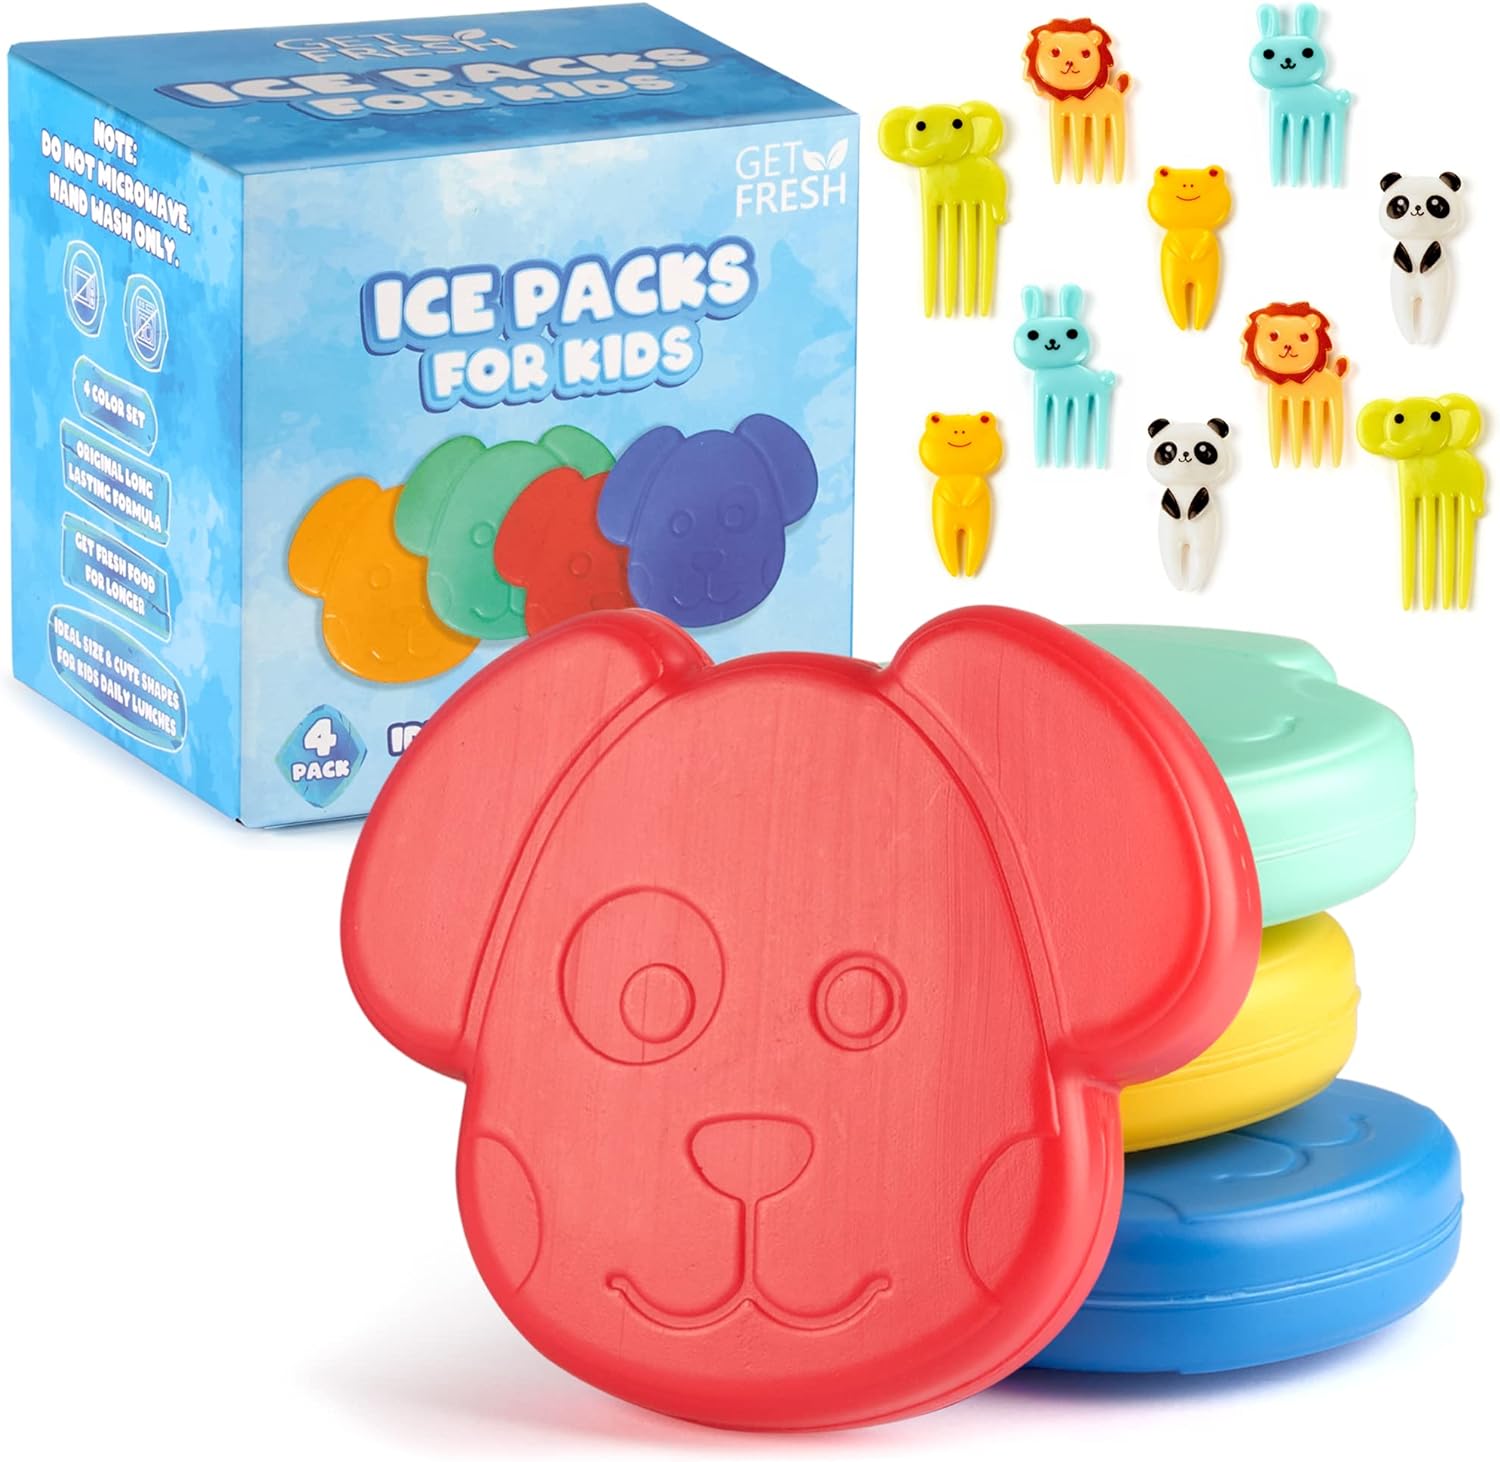 4-Pack Cute Small Dog Ice Blocks for Cool Bags and Kids Lunch Box